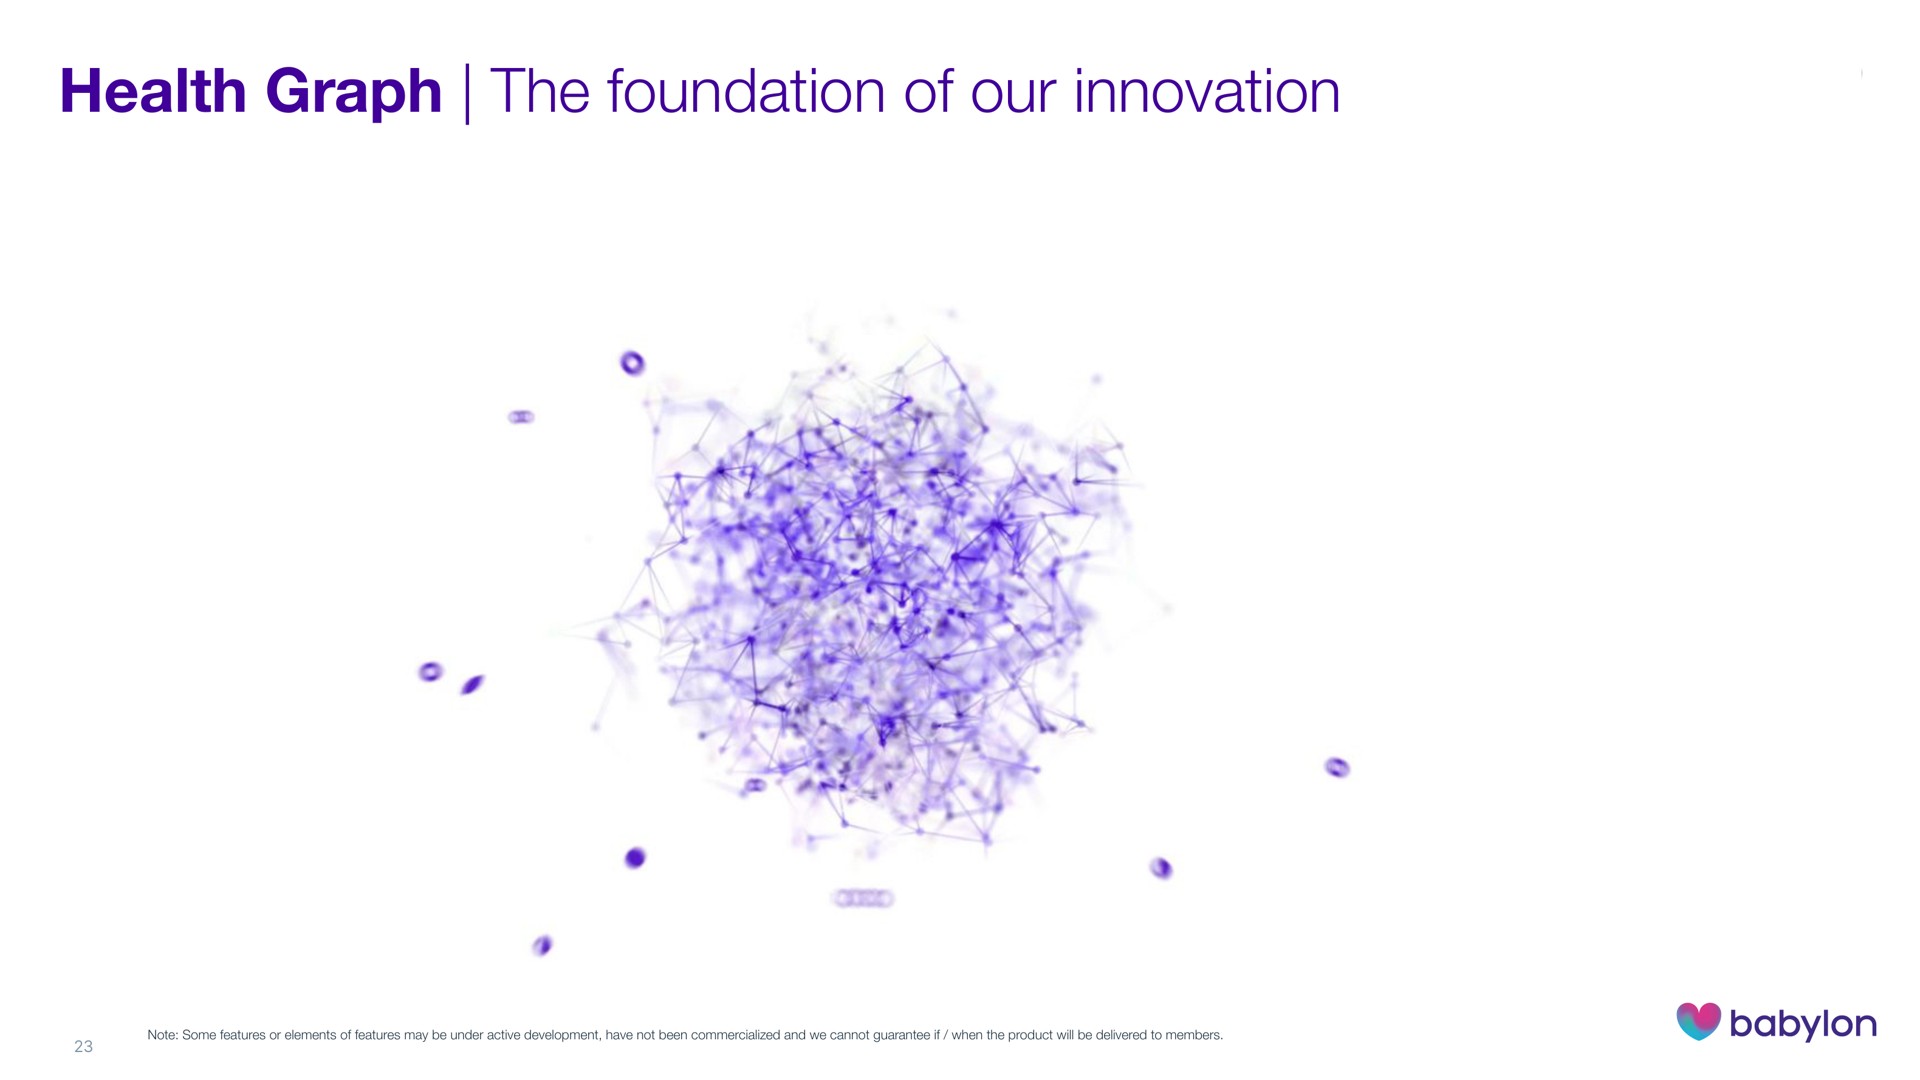 health graph the foundation of our innovation | Babylon